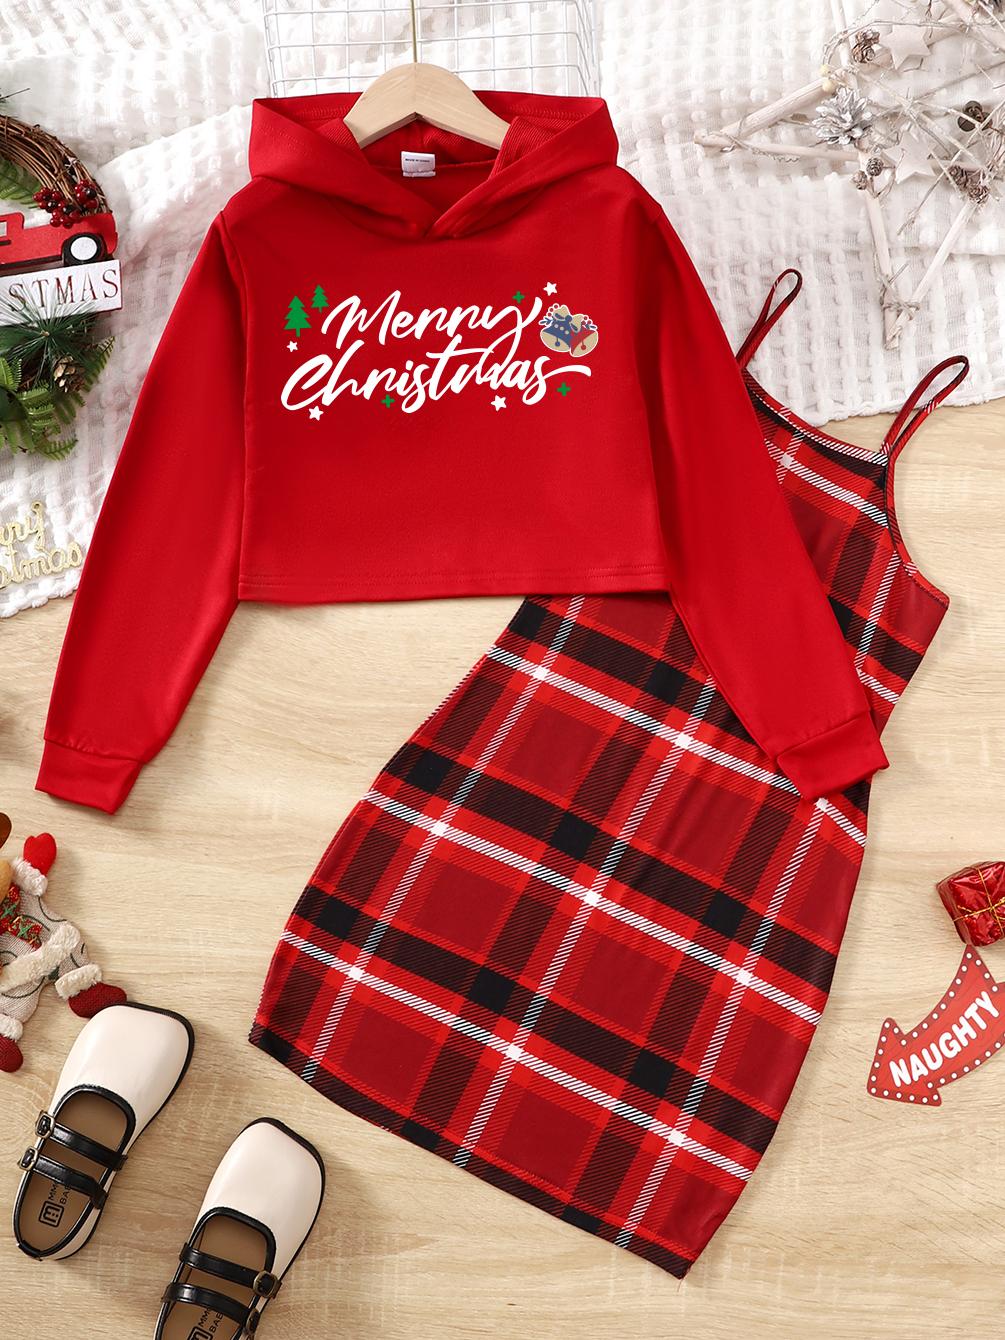 8-14Y  Kids Girls Christmas Outfits Straps Plaid Print Dress Long Sleeve Sweater Hoodies 2Pcs Nice Apparel Clothes Set Red Catpapa 462307023